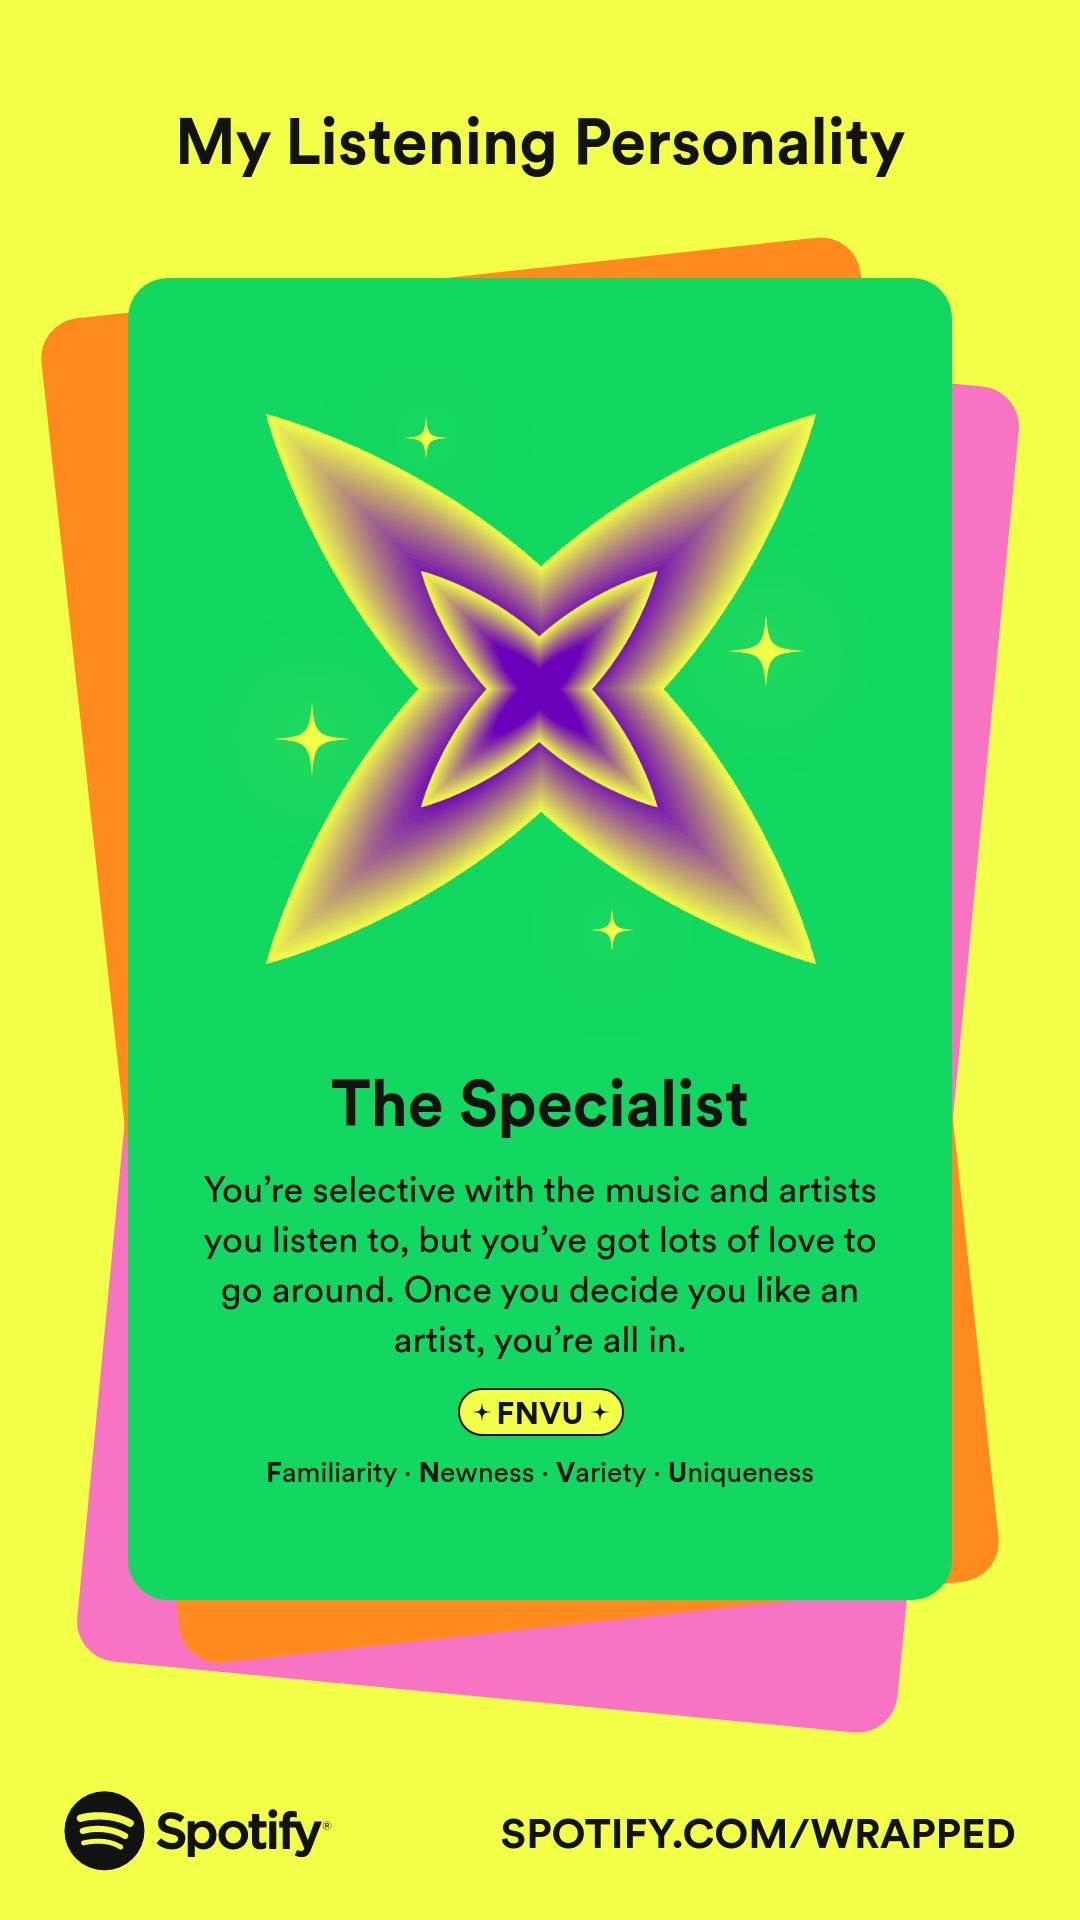 Spotify Wrapped listening personality, with details described in the following text